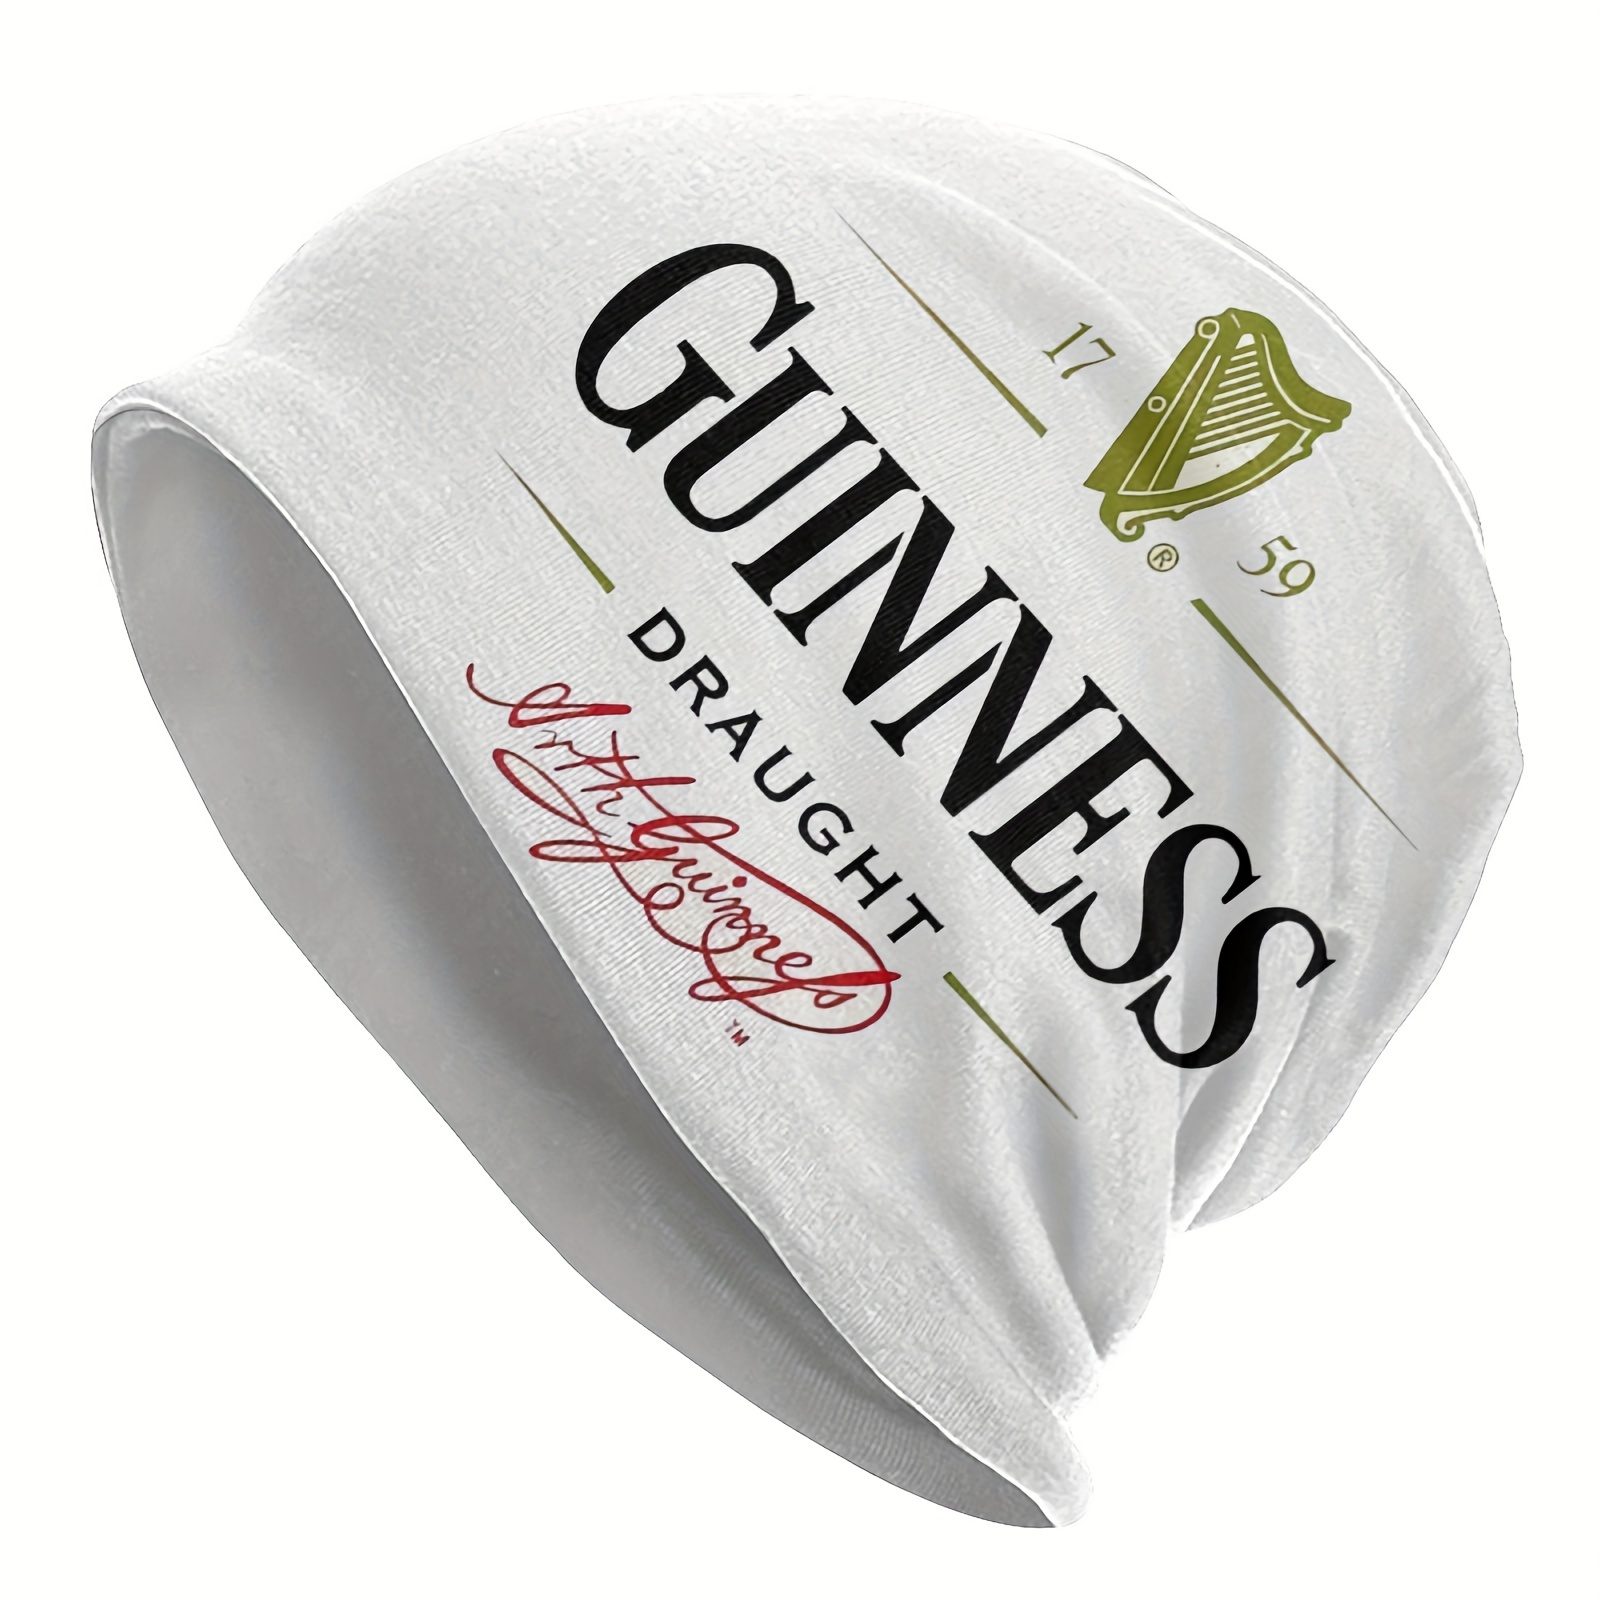 

Guinness Retro Pattern Beanie Hat, Soft Thin Style Summer Bonnet Hat For Sports, Hippie Y2k Retro White, Ideal Choice For Gifts